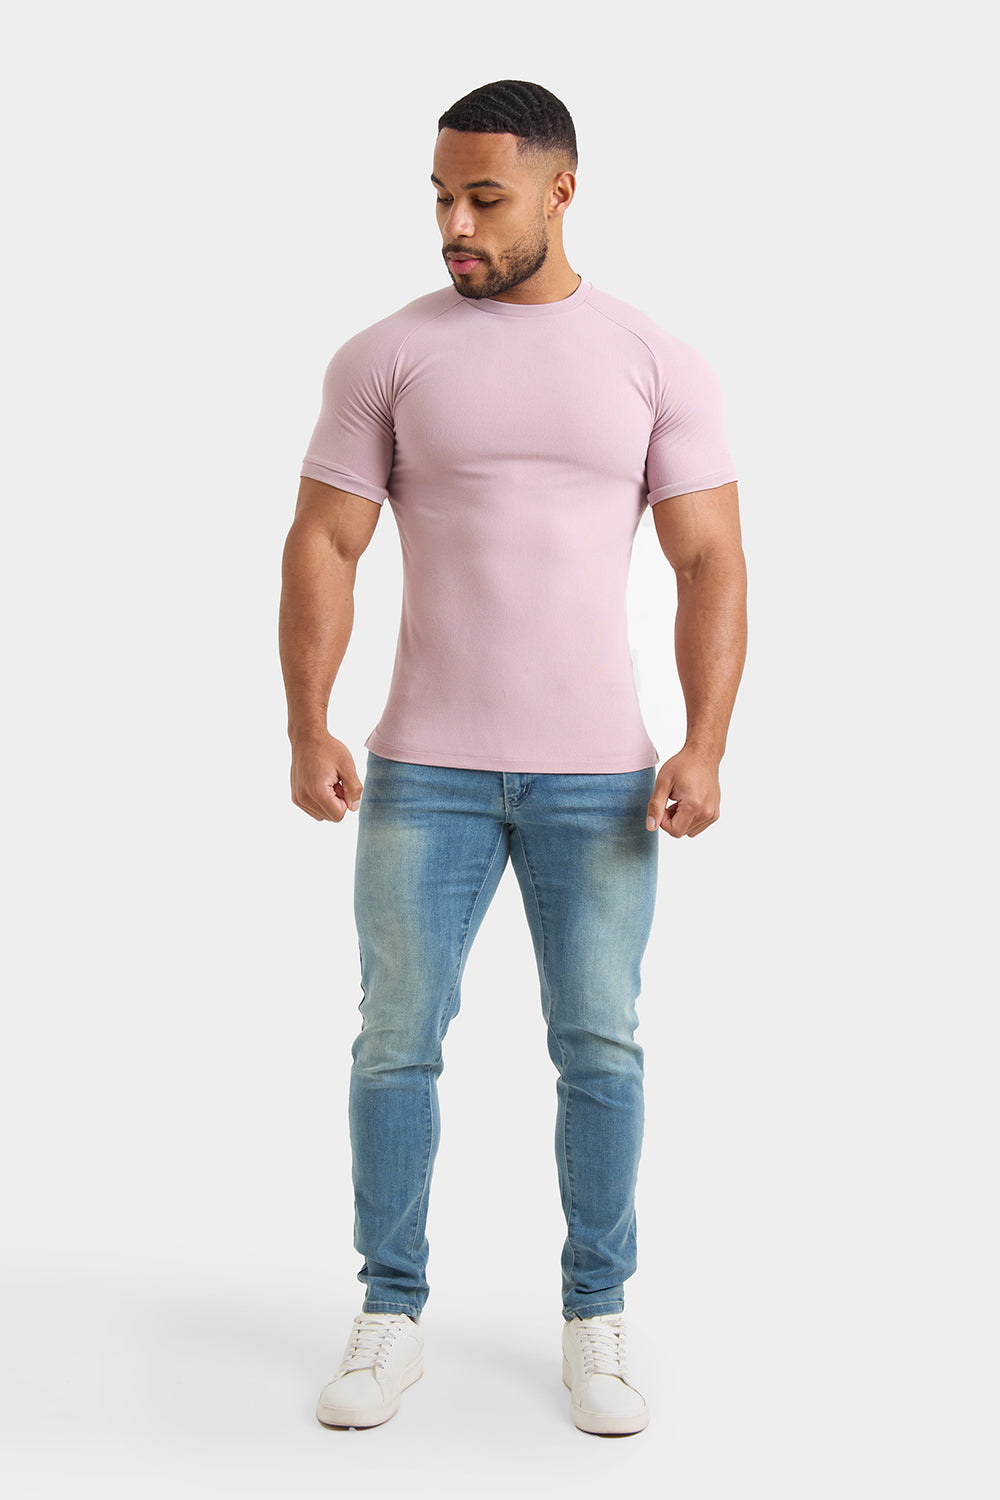 Textured Fashion T-Shirt in Dusky Pink - TAILORED ATHLETE - ROW